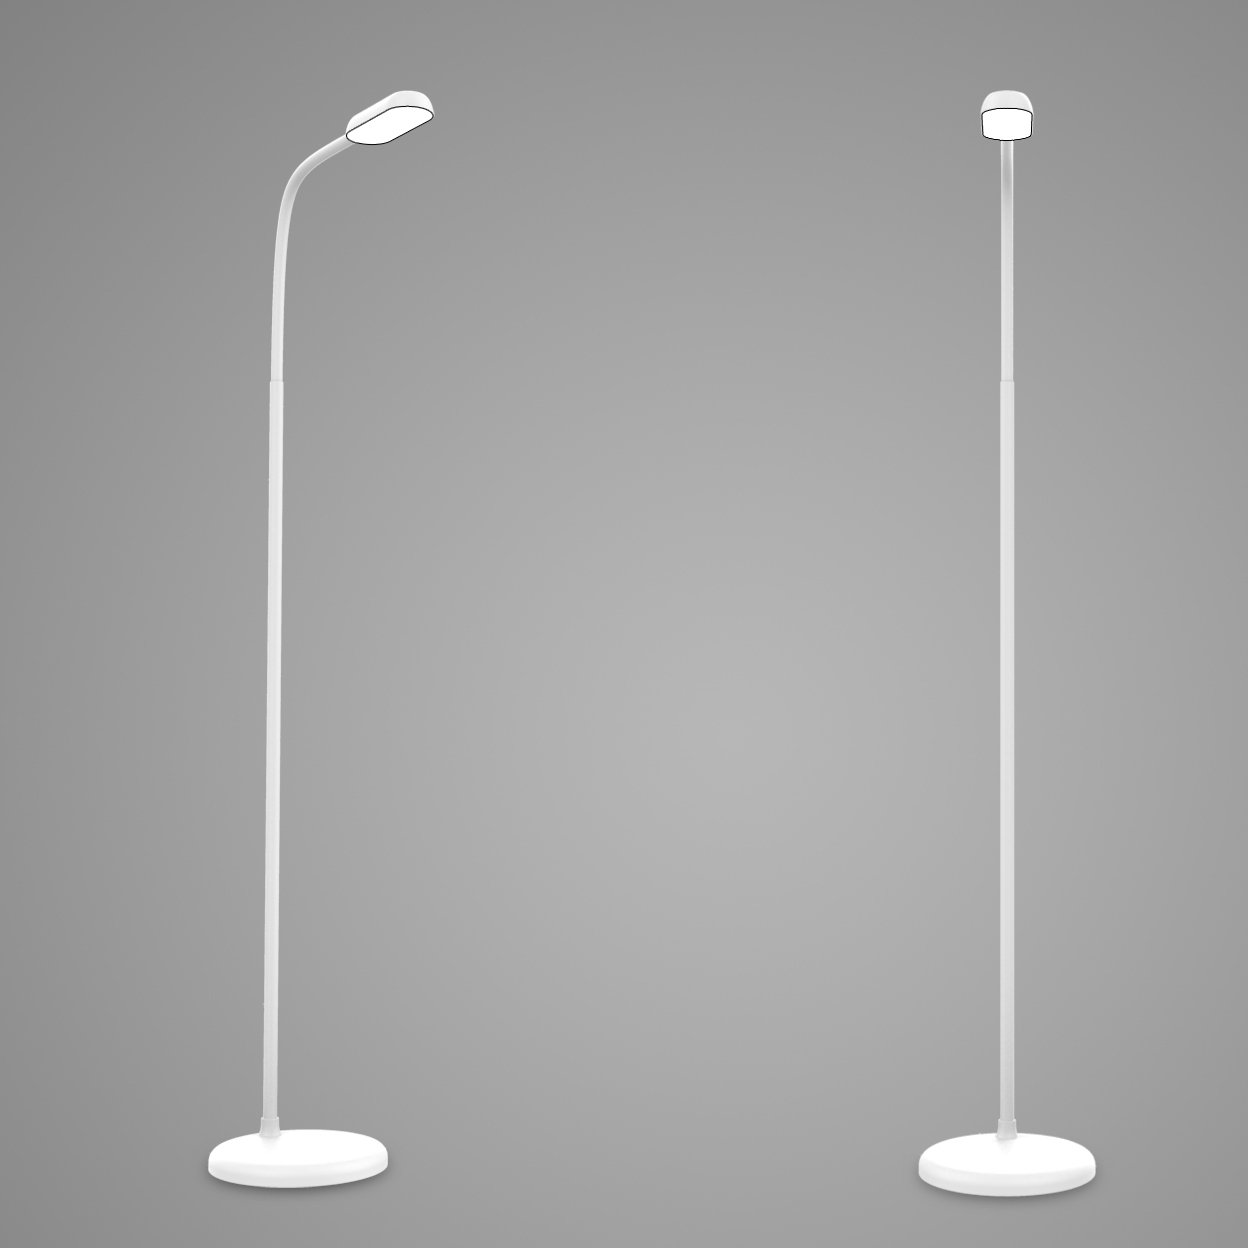 LUMOS LED Rechargeable Battery Operated Reading Floor Lamp ( White )